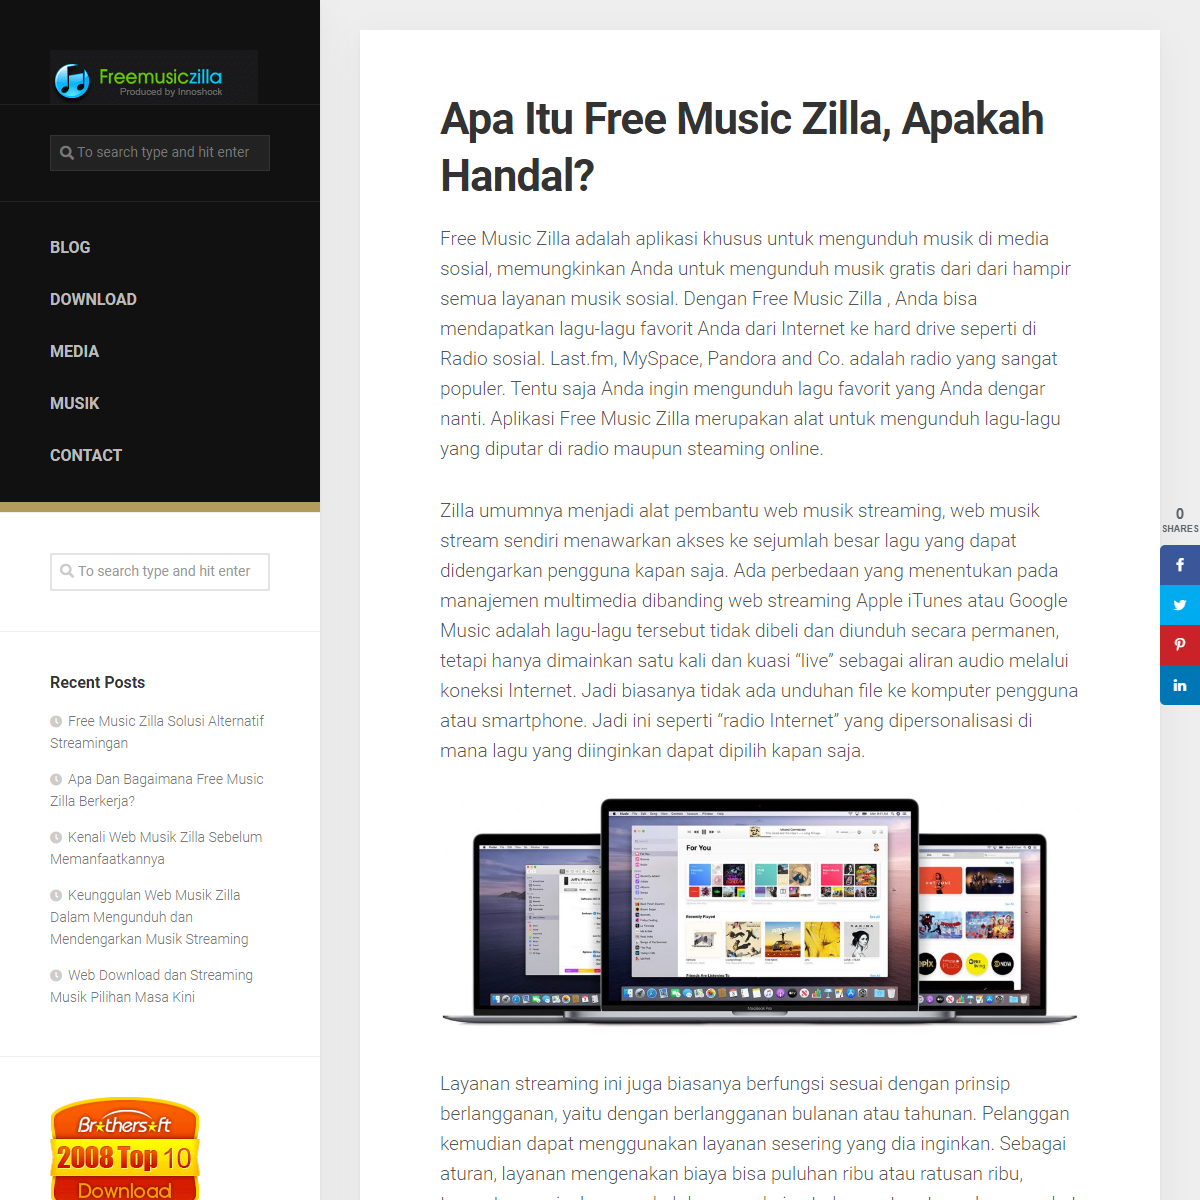 A complete backup of http://www.freemusiczilla.com/